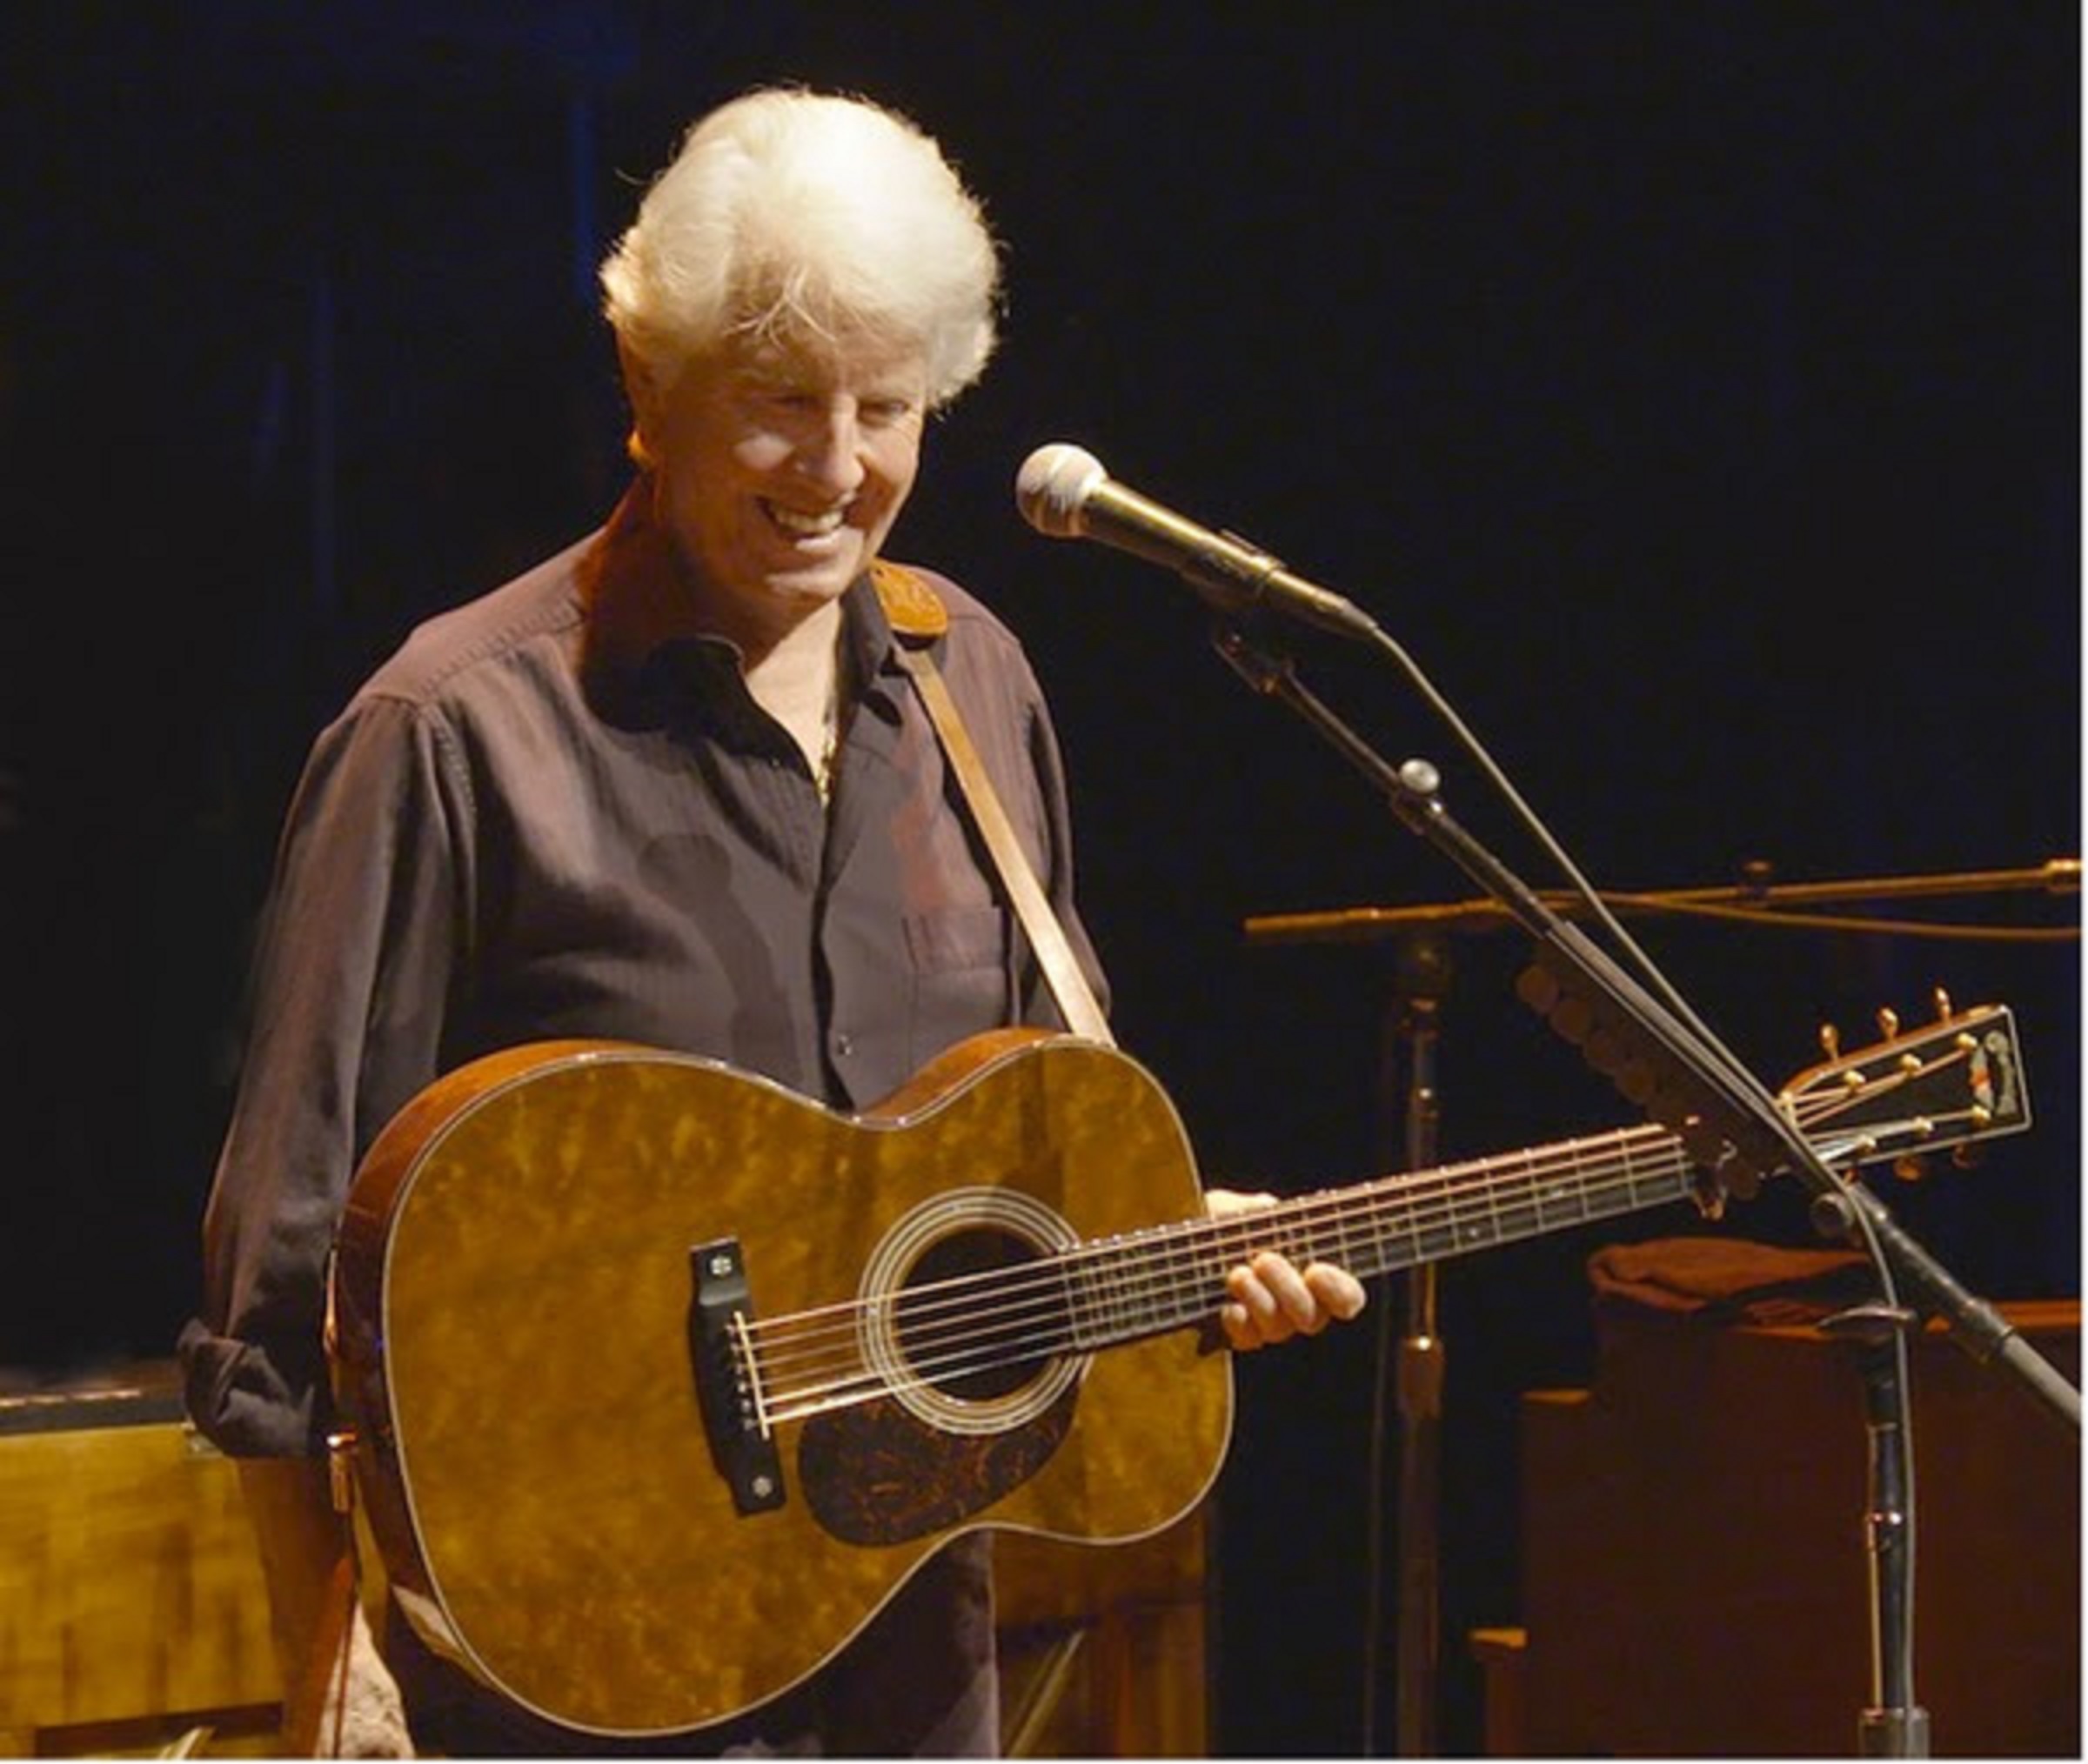 "Graham Nash Live" out today on Proper Records, features live